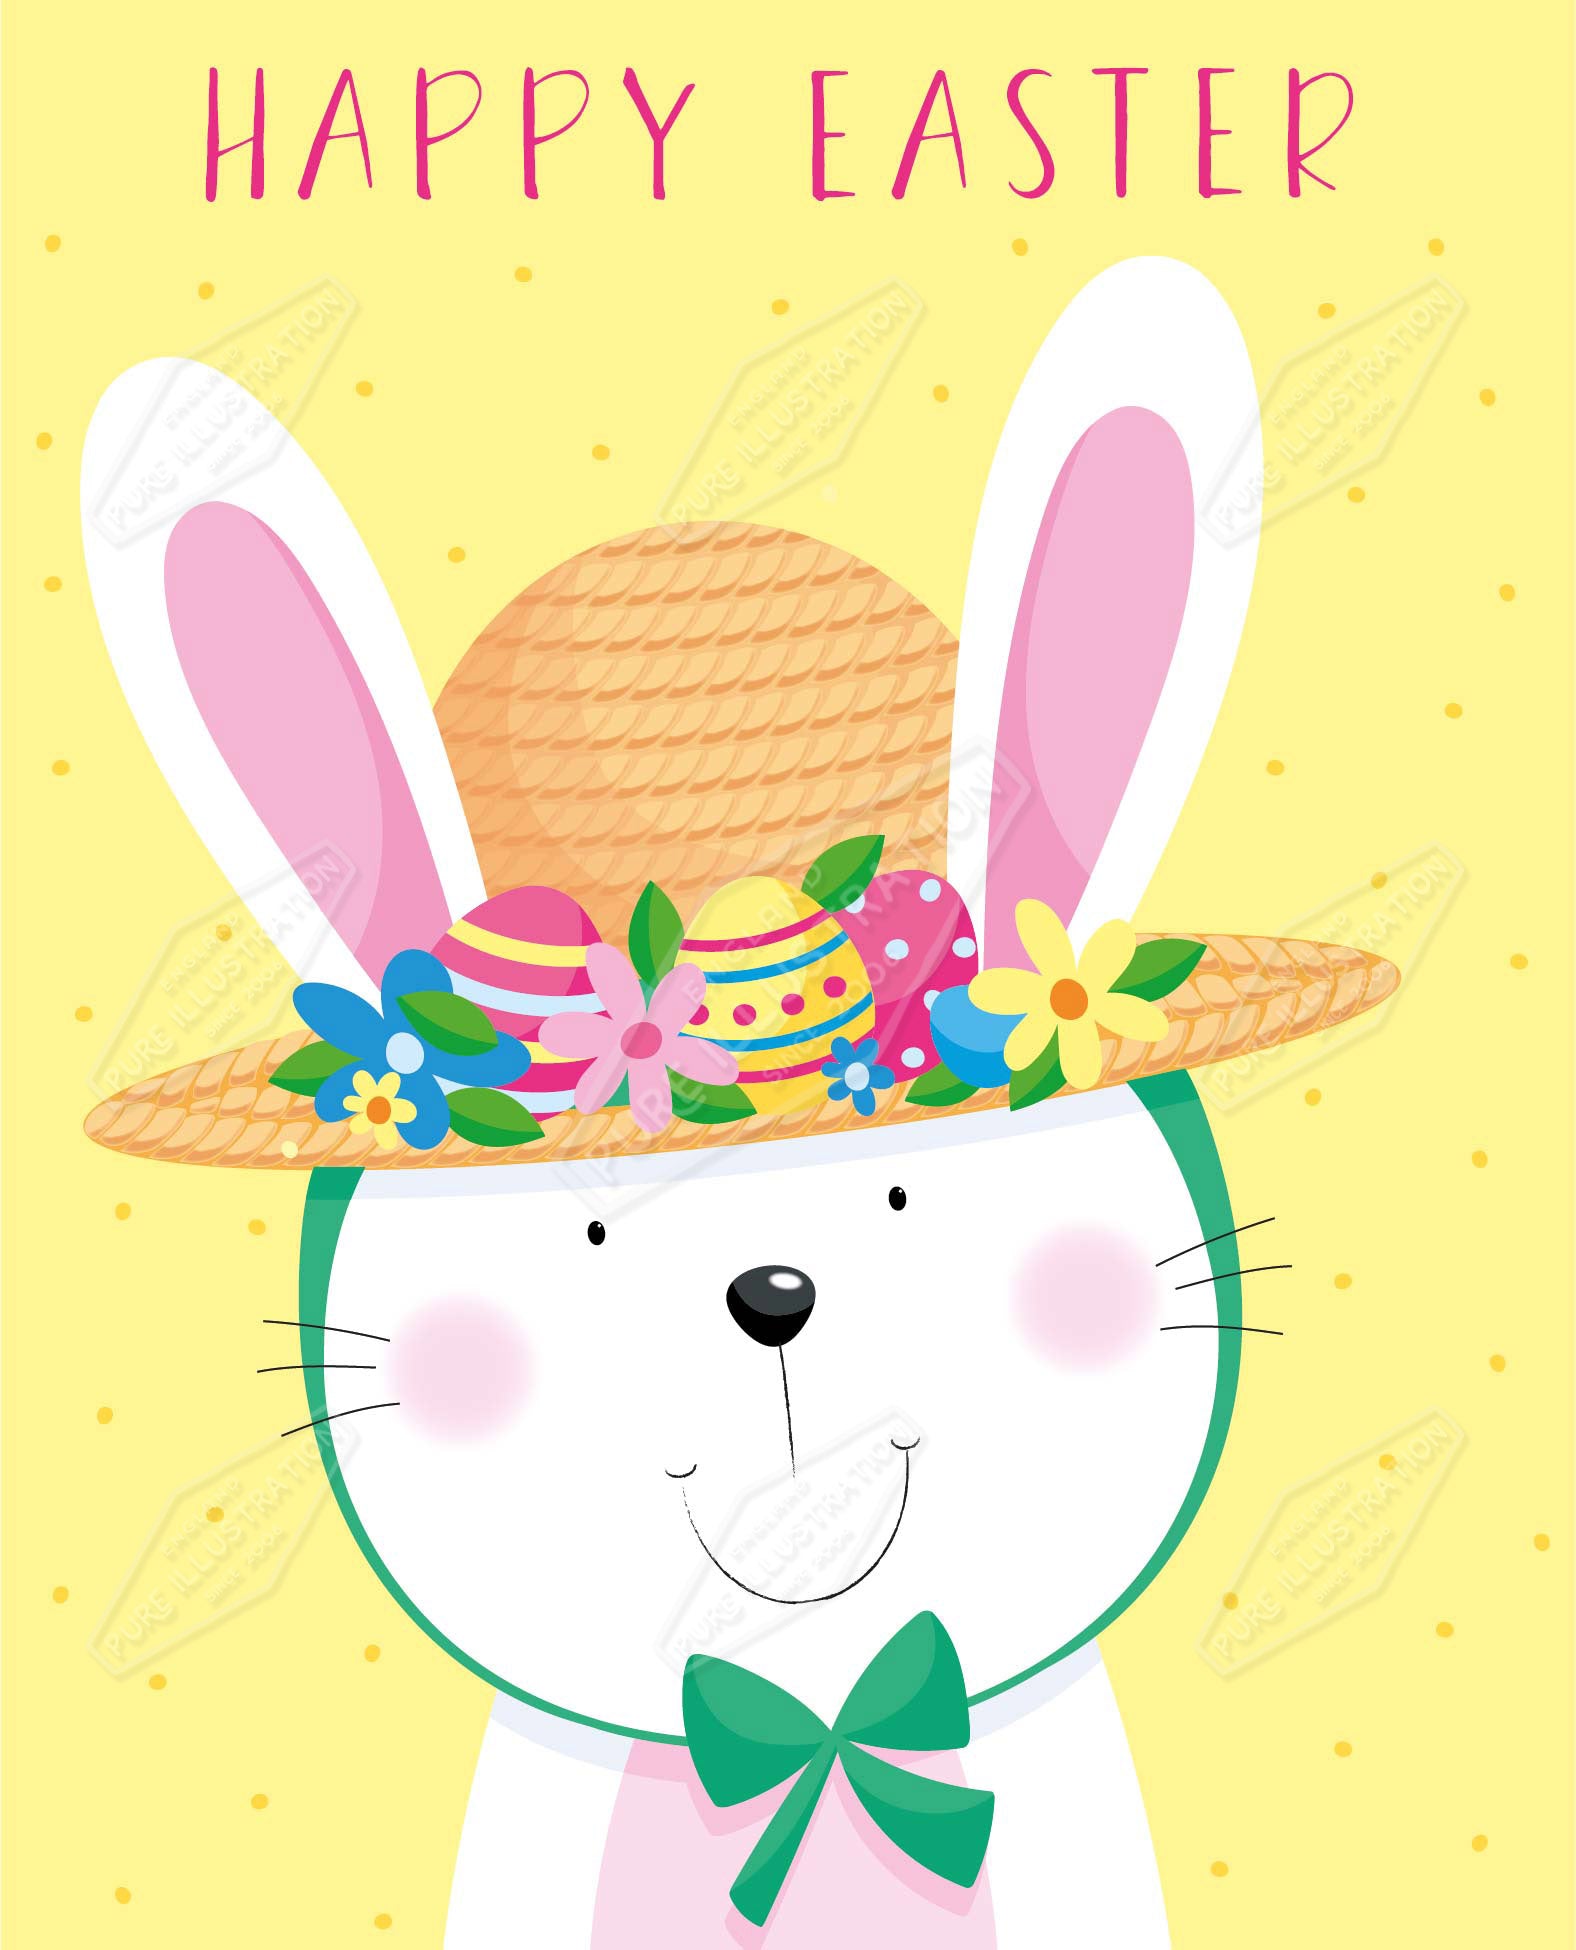 00035130SPI- Sarah Pitt is represented by Pure Art Licensing Agency - Easter Greeting Card Design